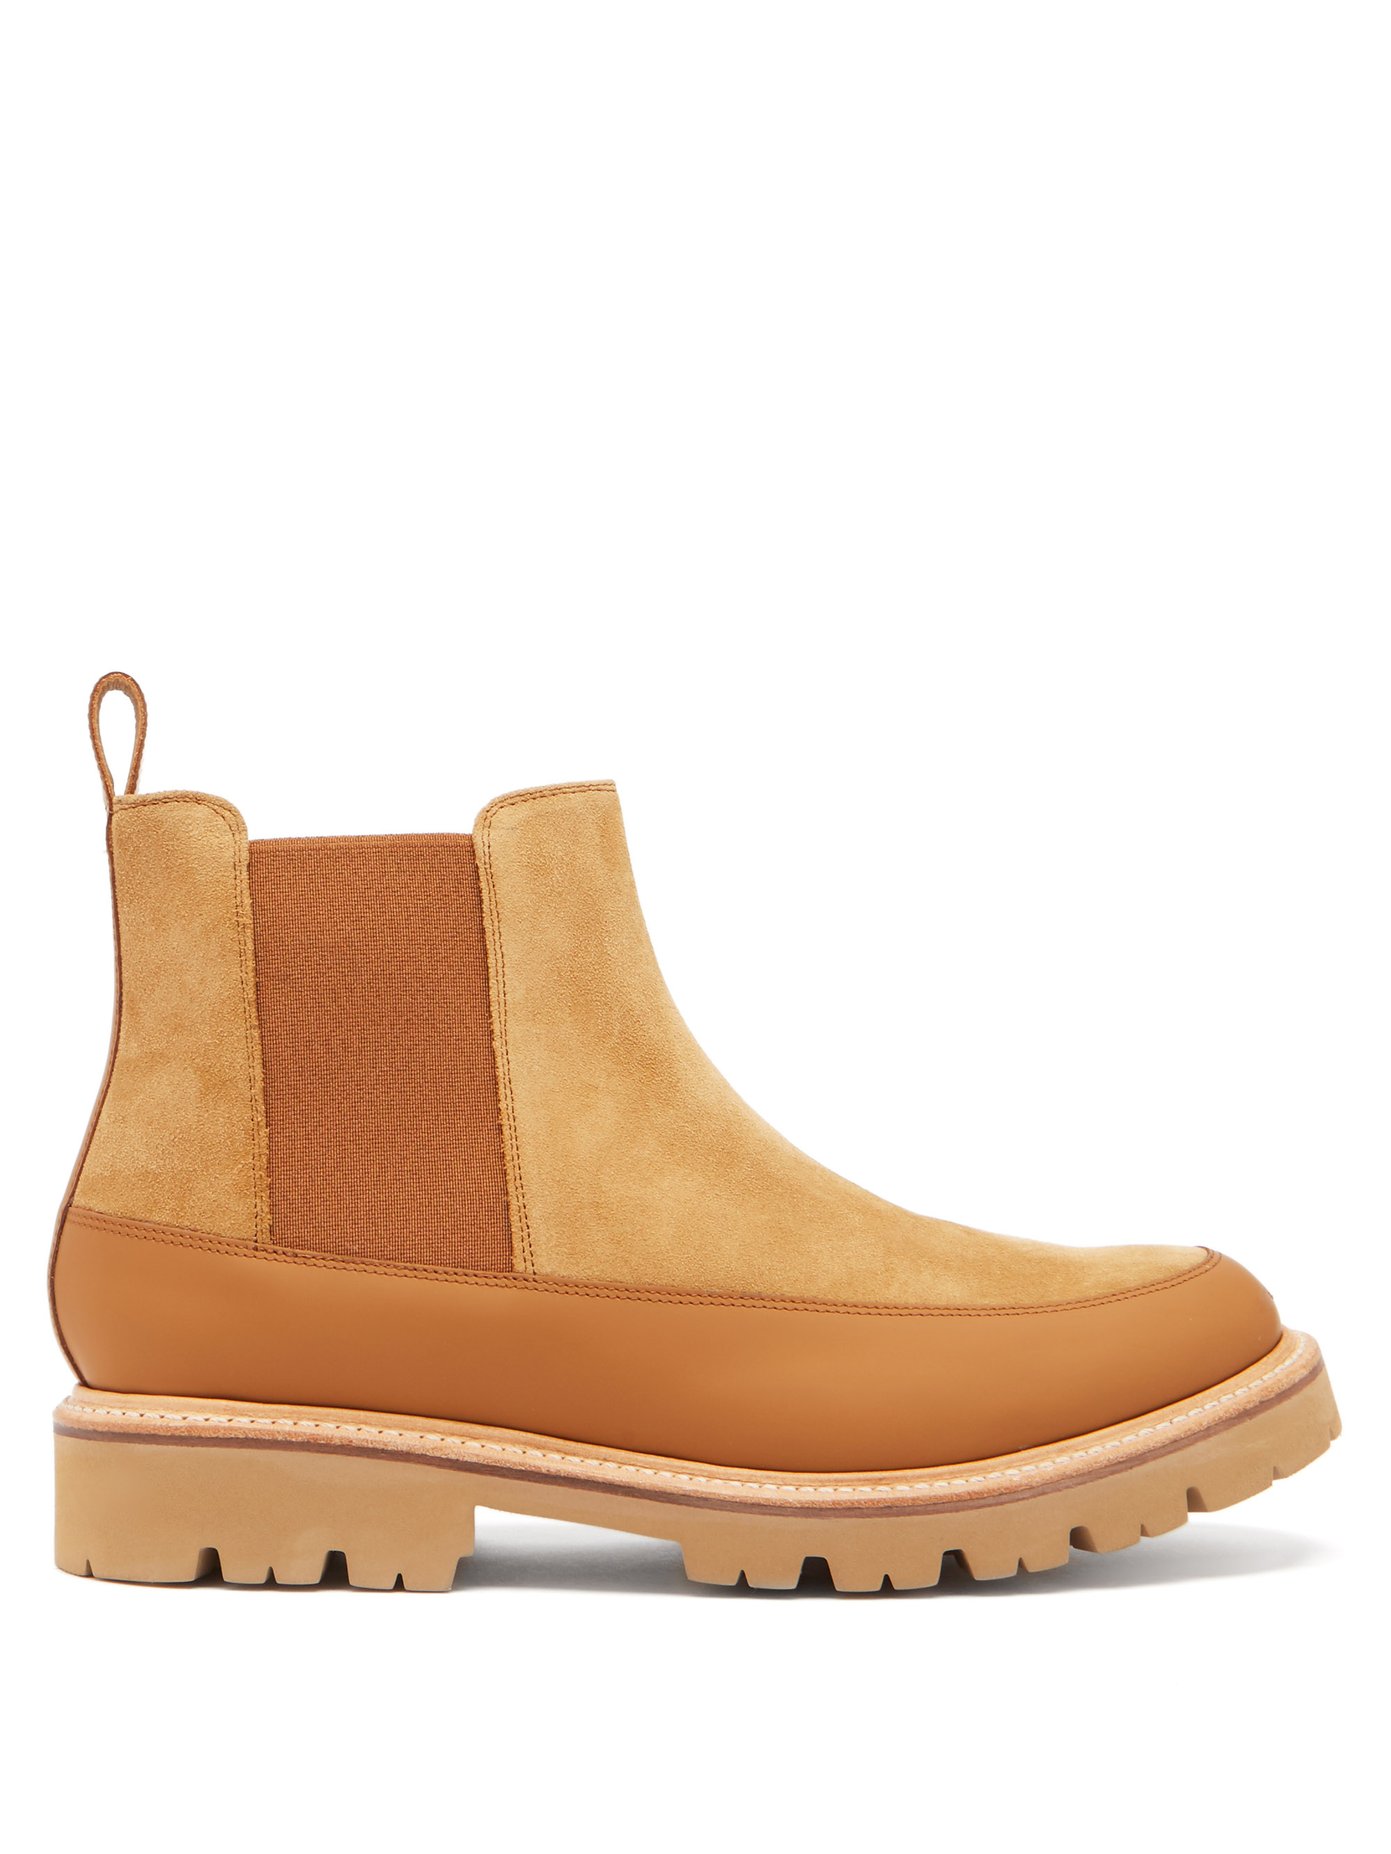 grenson suede chelsea boots